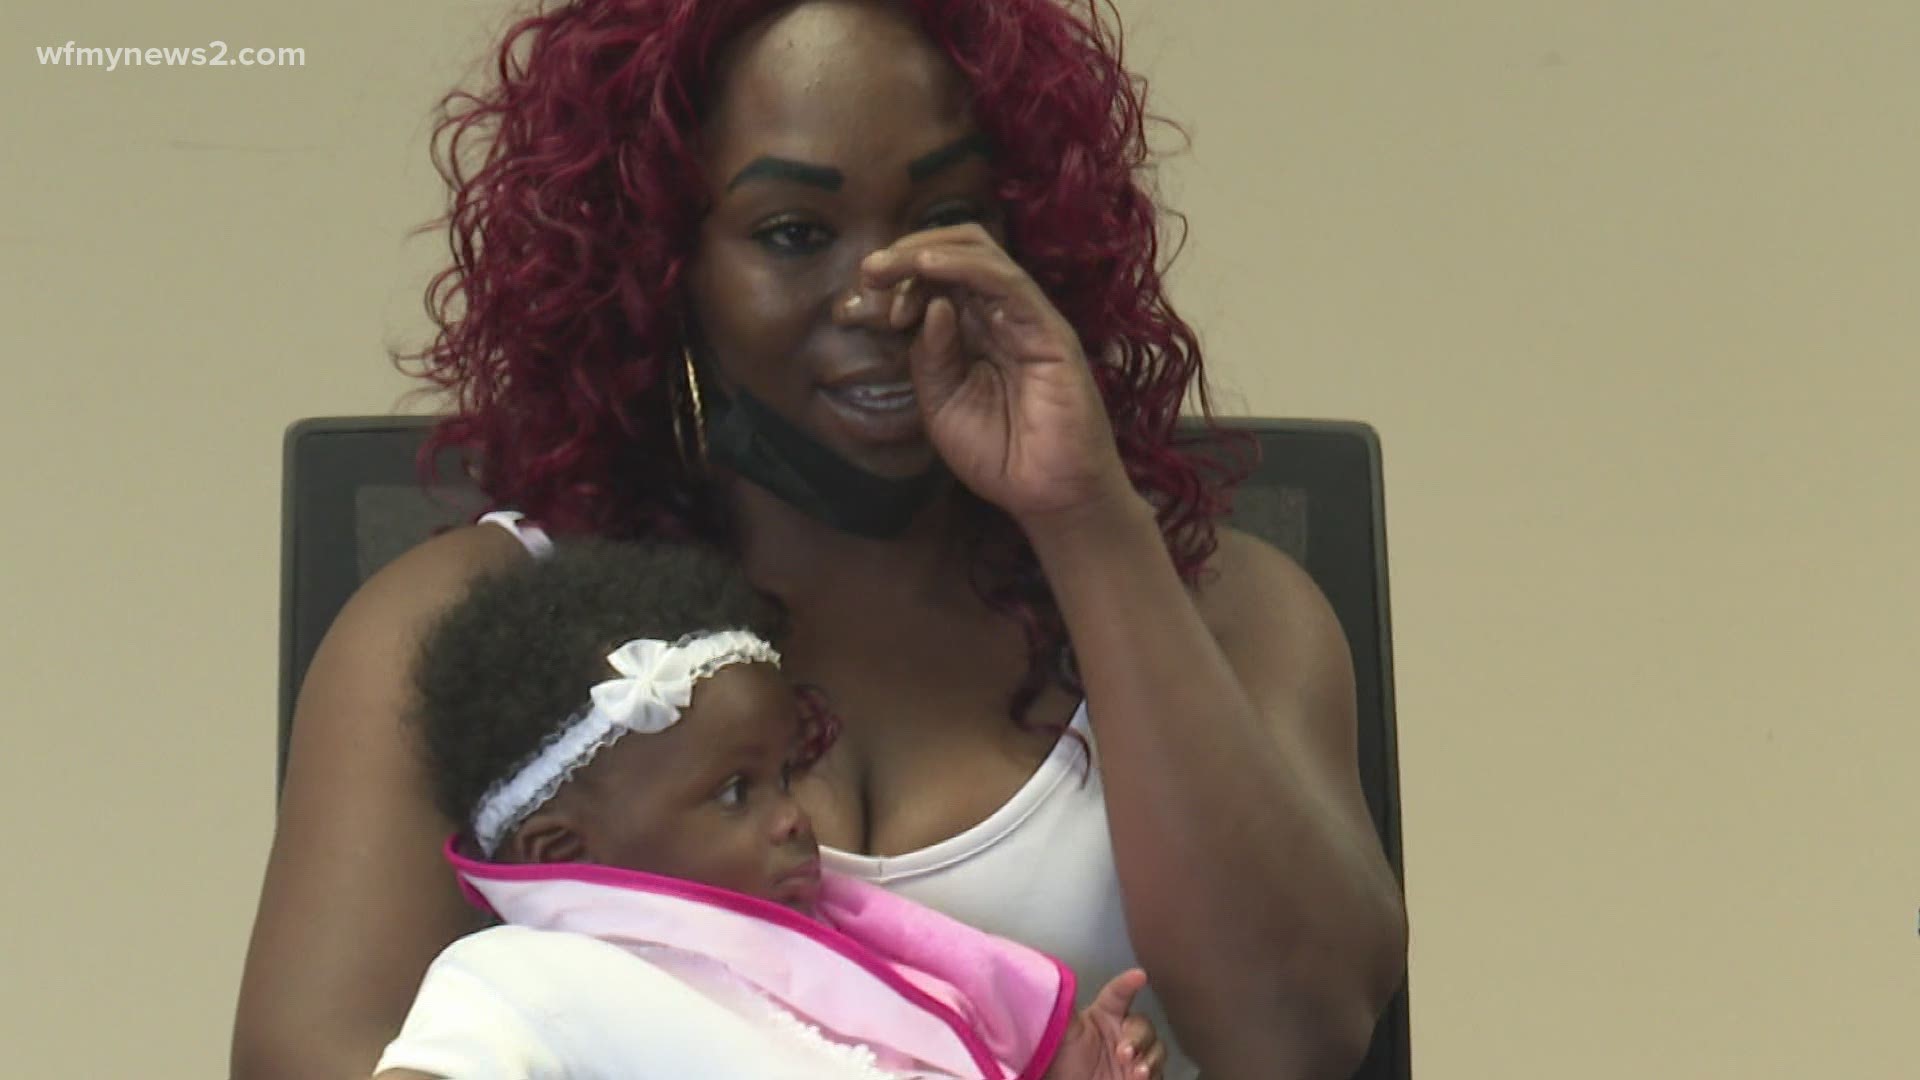 She was frantic when she called 911 that night. Nearly a week later, she shared her relief to have her baby back home.